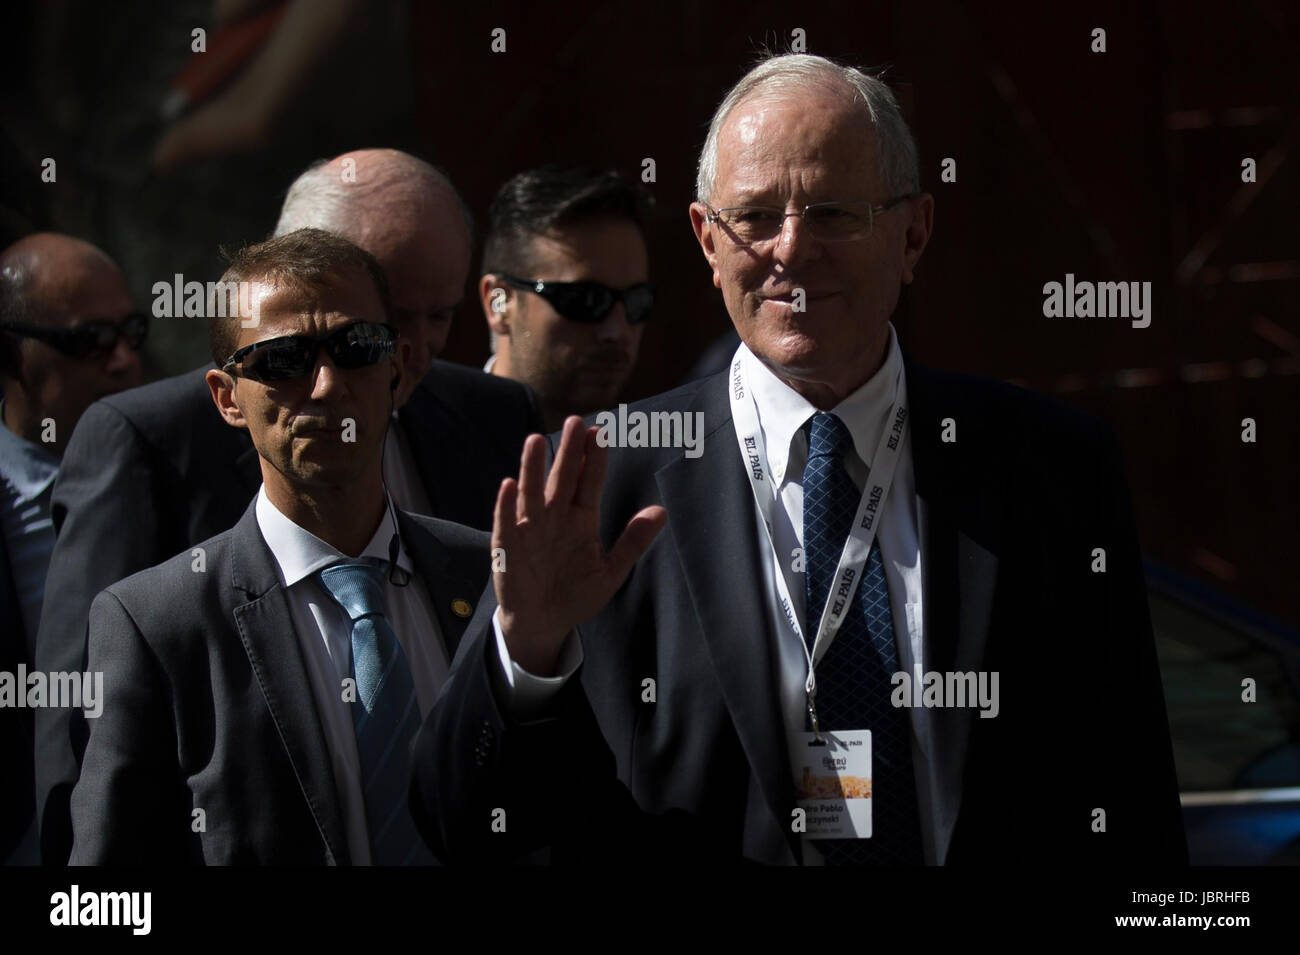 Madrid, Spain. 12th June, 2017. Peru's President Pedro Pablo Kuczynski attends conference 'The future of Peru', in Madrid, on Monday 12, June 2017. Credit: Gtres Información más Comuniación on line,S.L./Alamy Live News Stock Photo